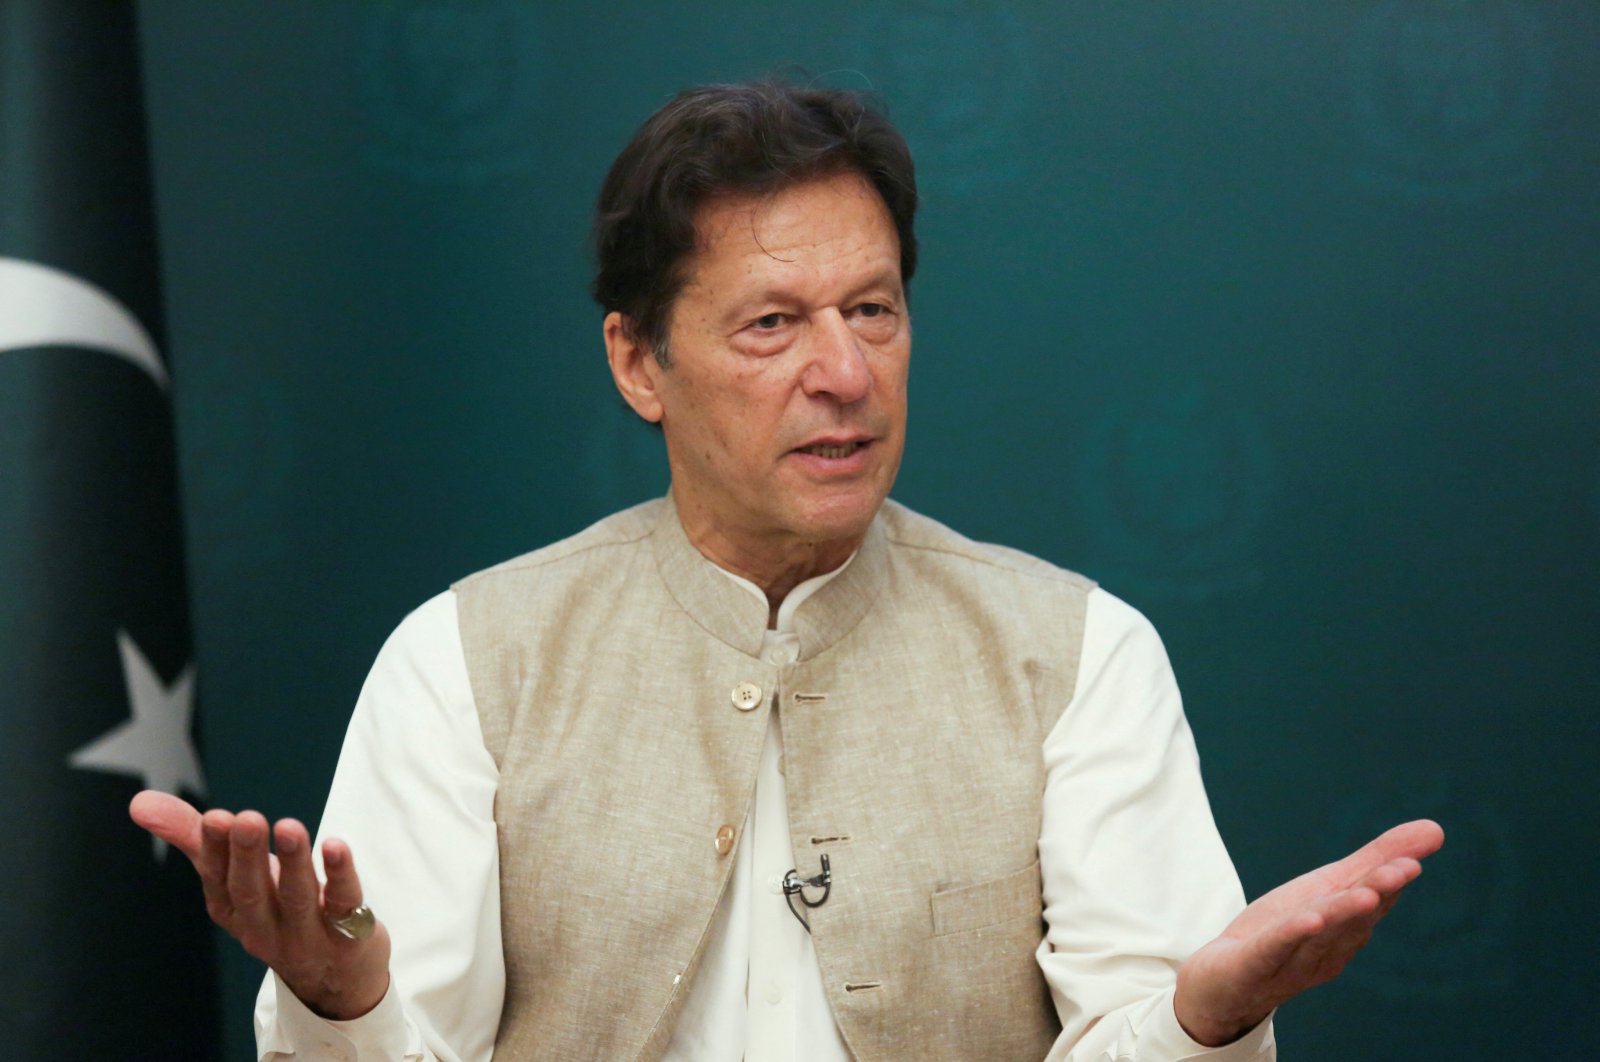 Pakistan's Prime Minister Imran Khan gestures during an interview with Reuters in Islamabad, Pakistan, June 4, 2021. (Reuters Photo)